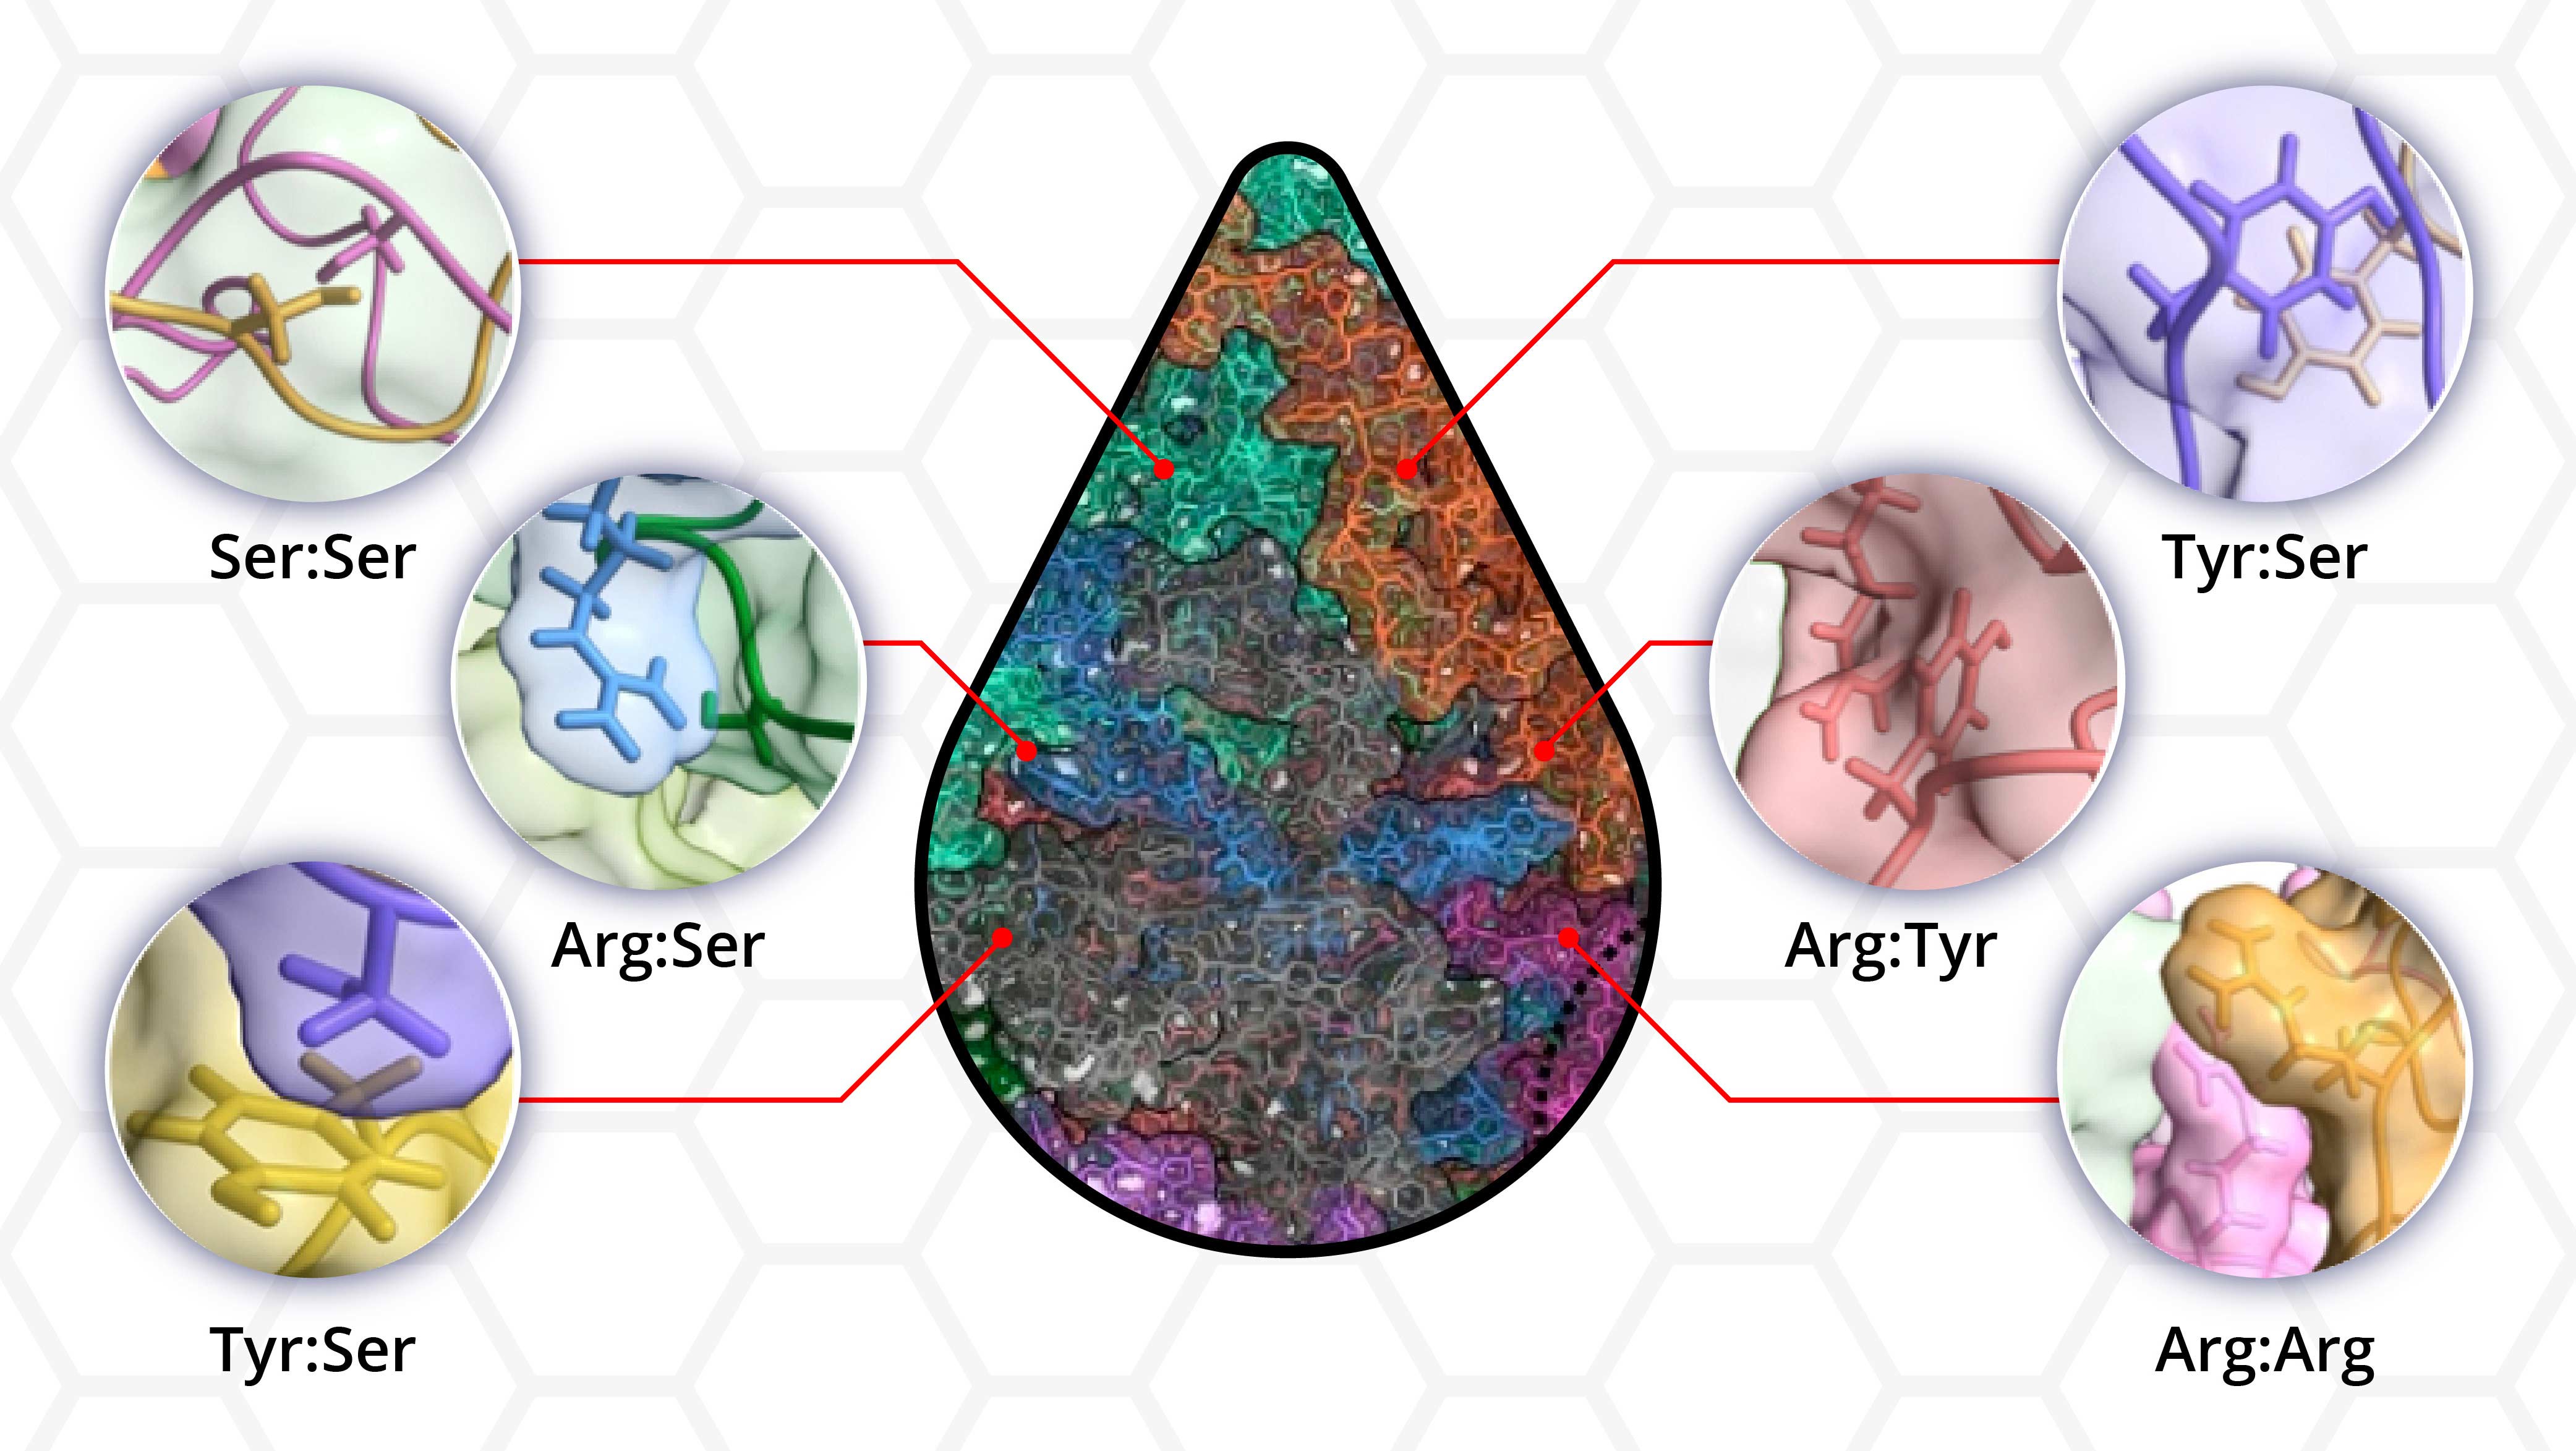 Illustration of a protein droplet surrounded by images of the many interactions between amino acids within the protein. The amino acids are labeled as Ser:Ser, Arg:Ser, Tyr:Ser, Arg:Tyr and Arg:Arg.